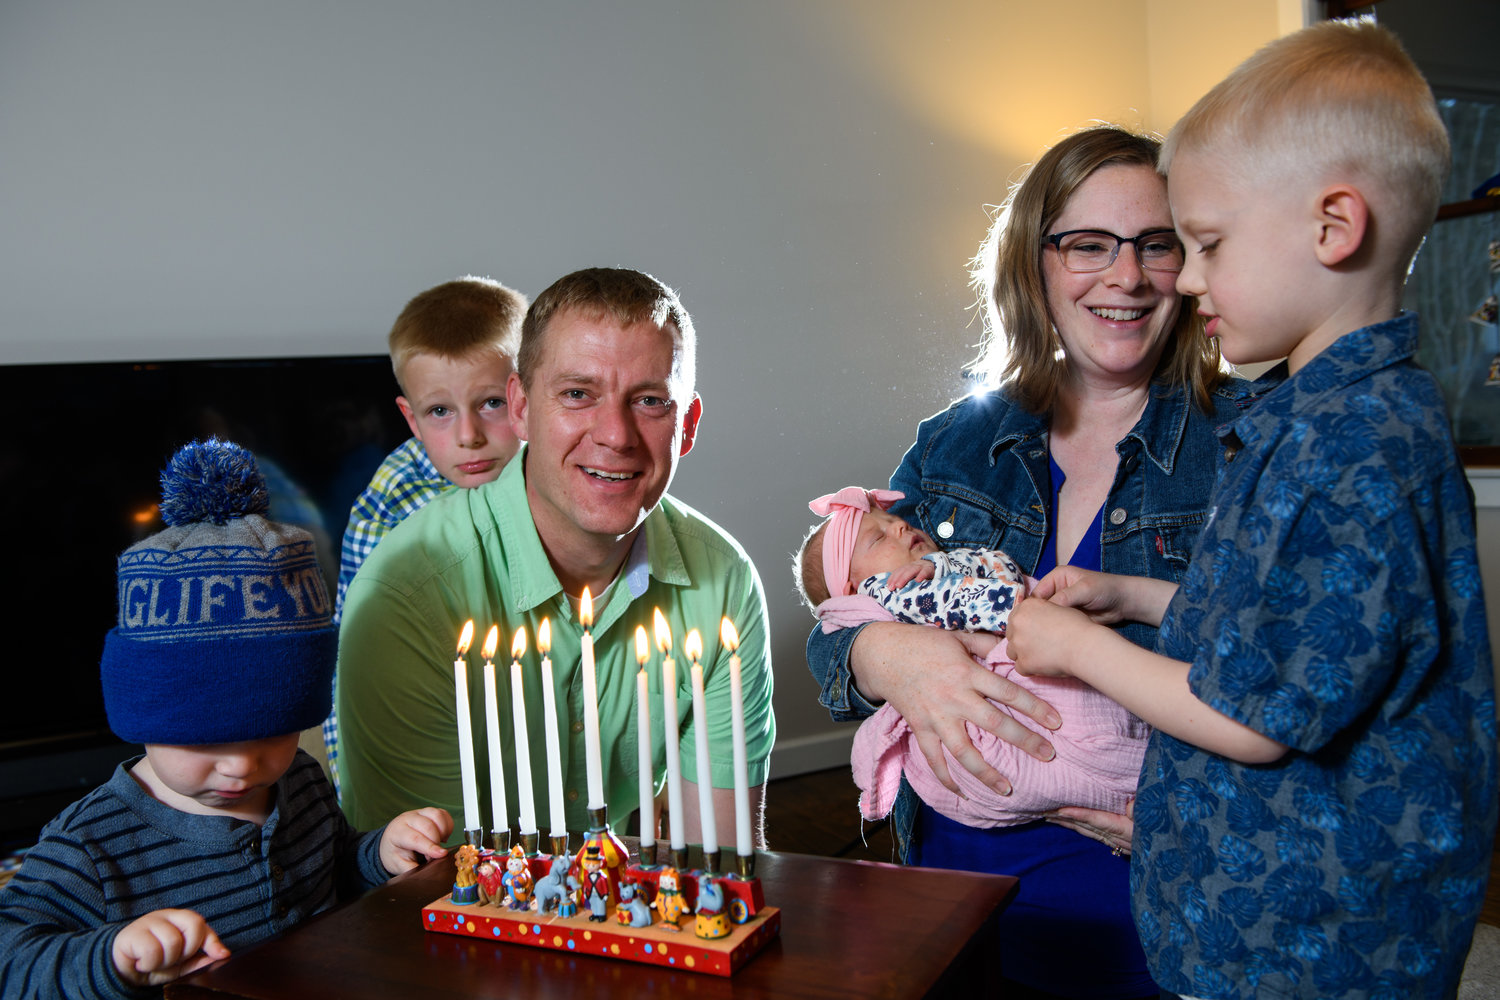 Opposite, the Belifield family incorporates both Jewish and Christian traditions in their celebration of the holidays. Mom Rachael’s family observed some Jewish traditions when she was growing up. From left are Iliza, 2; Samuel, 7; dad Michael; mom Rachael with baby Naomi; and Malakai, 5.